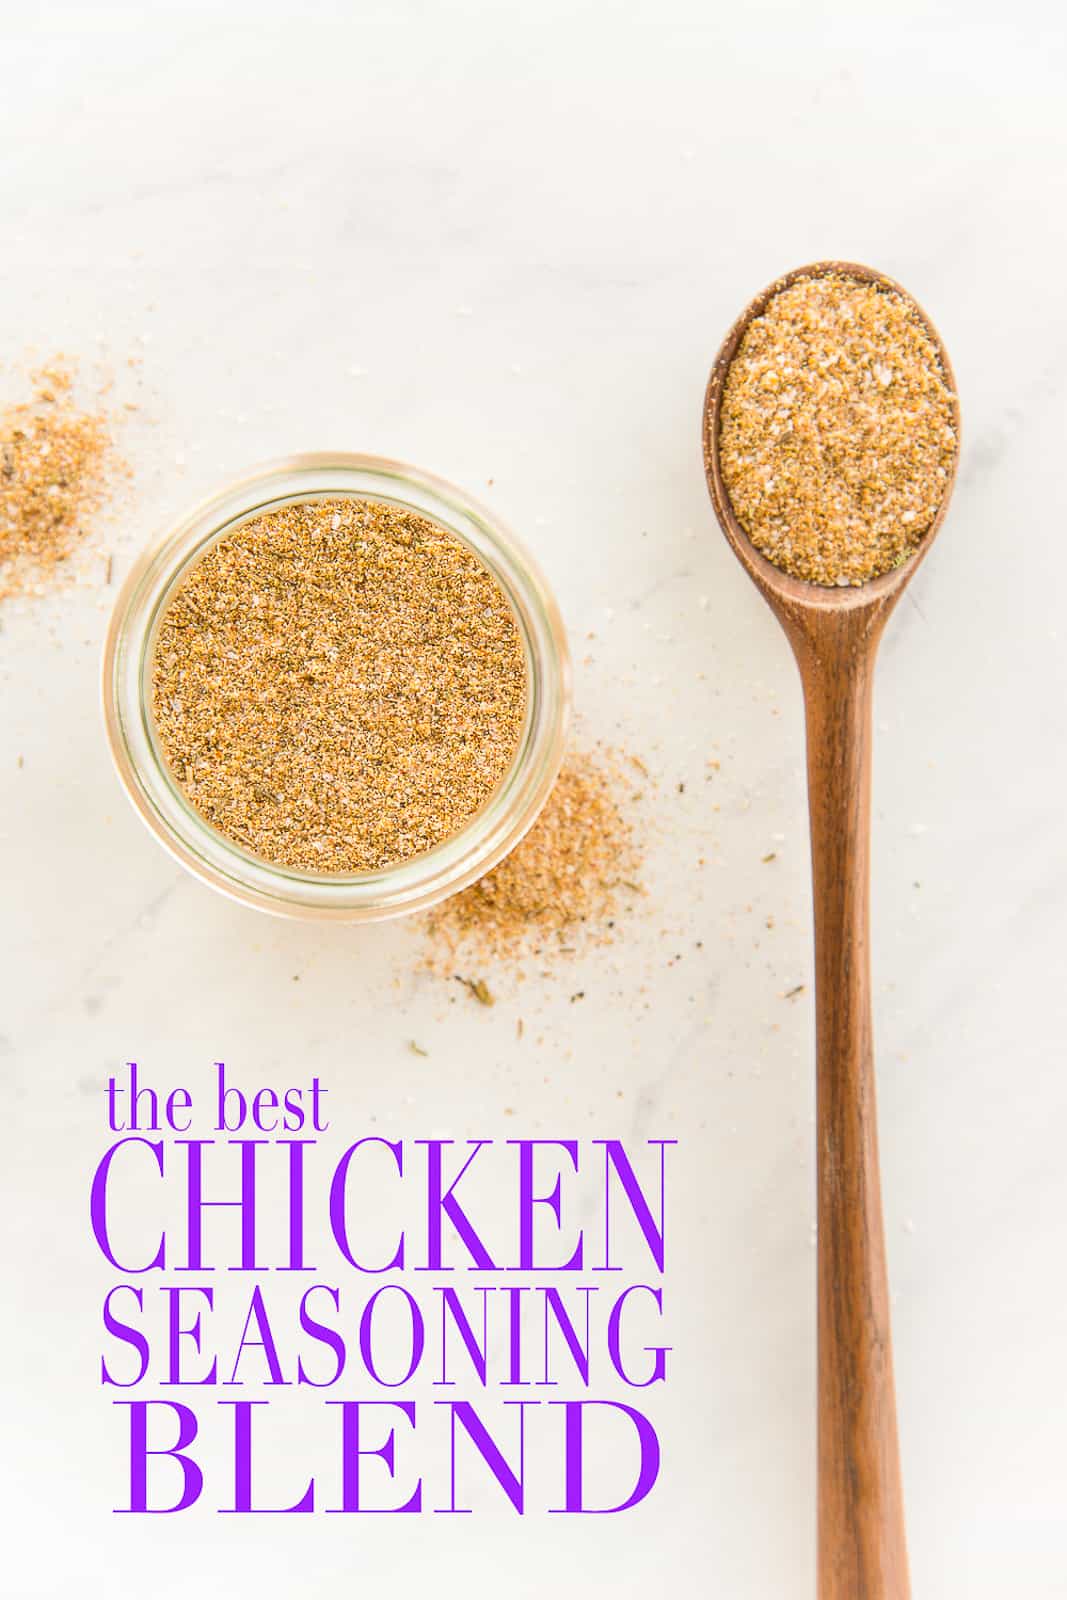 This is the best Chicken Seasoning Blend you'll ever taste. Made with a variety of spices and herbs, this spice blend will replace the store bought stuff you might have relied on in the past. Use it to season all cuts of chicken, other types of poultry, and even seafood or vegetables. #chickenseasoningblend #chickeseasoning #poultryblend #spiceblend #spicerub #spices #seasonall #seasonedsalt #chickenrub #chicken #poultry #homemadespiceblend #BBQ #grillseasoning #seafood #vegetables via @ediblesense